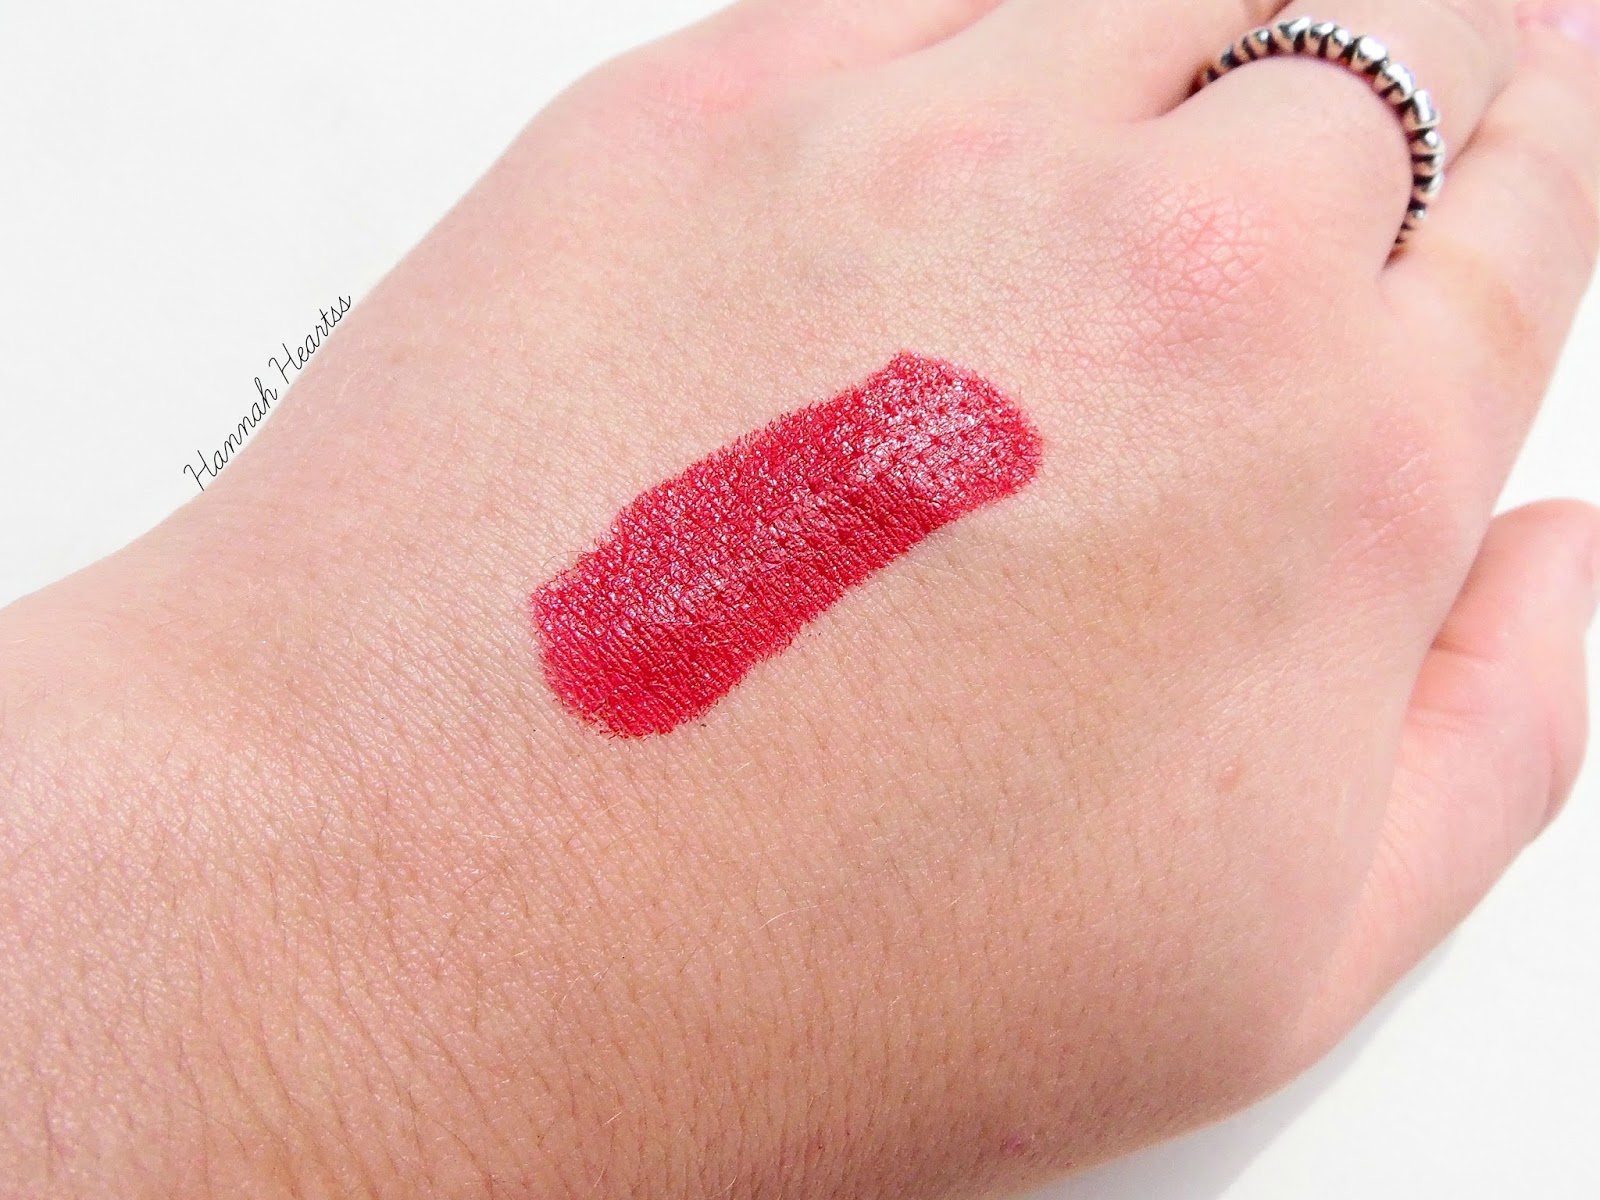 Zoeva Luxe Cream Lipstick in Cooling Passion Swatch